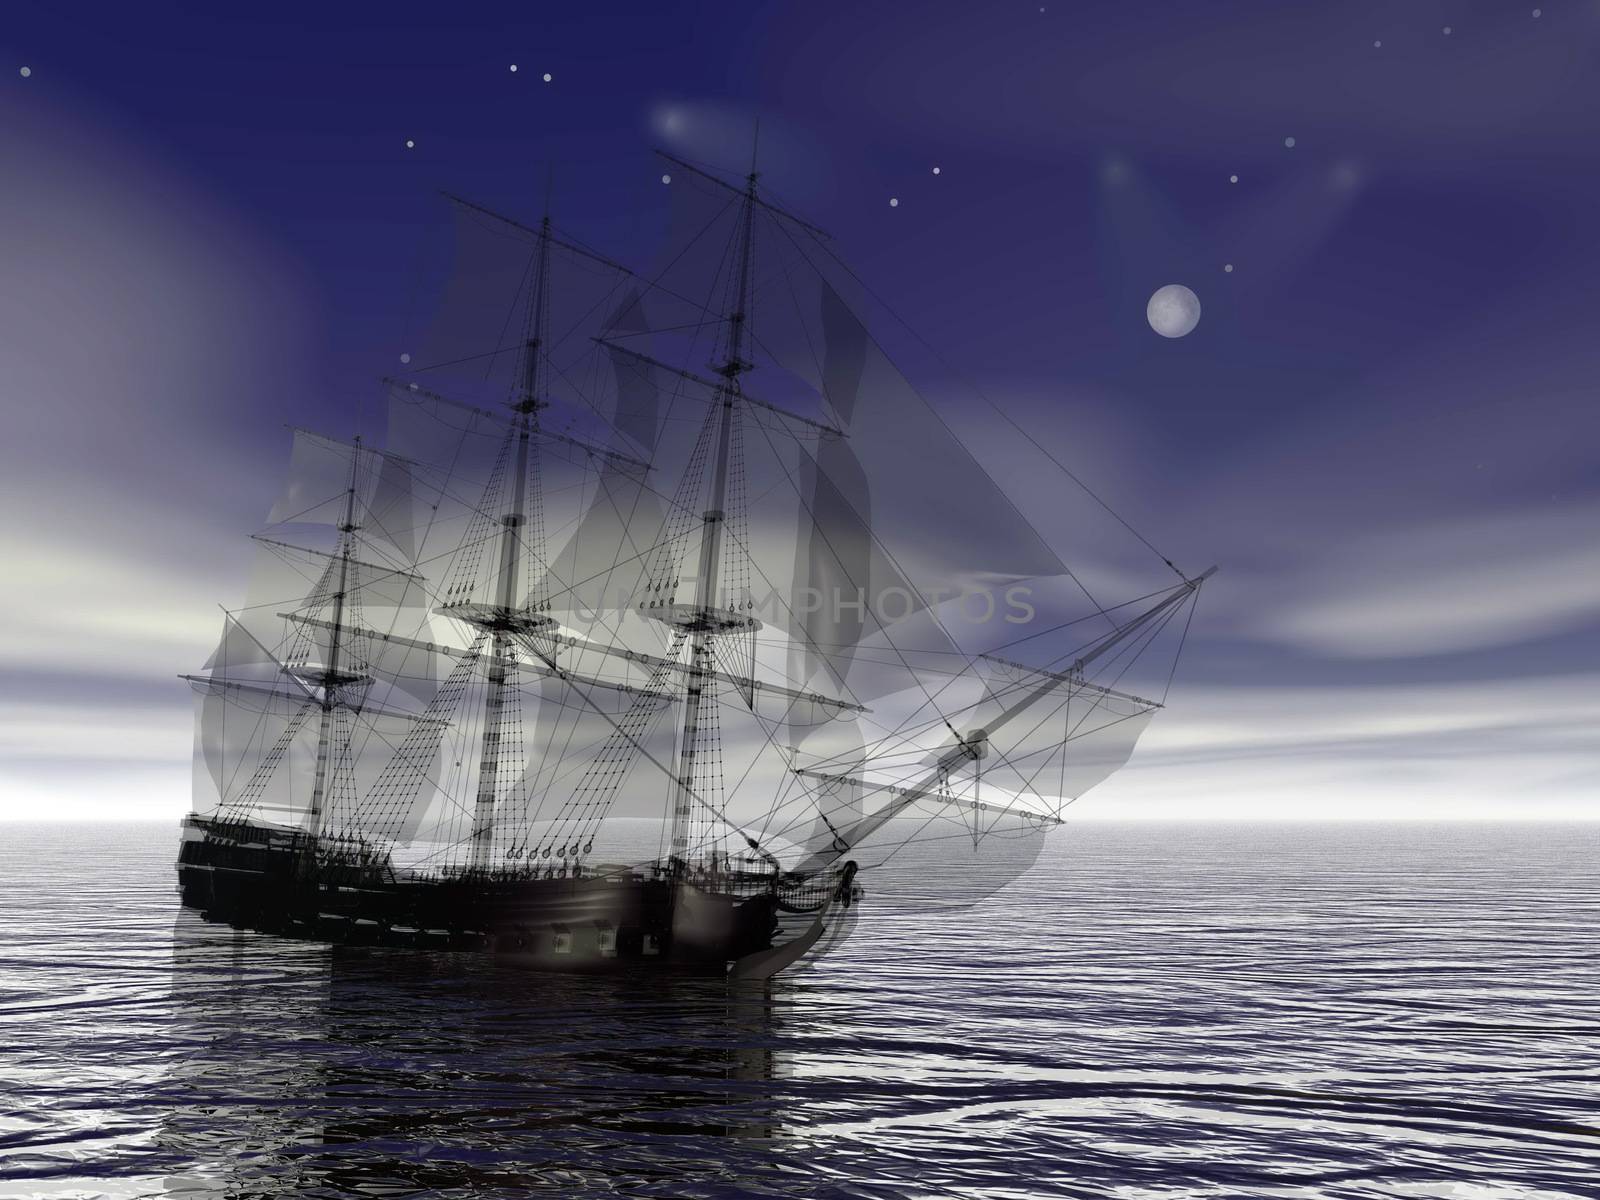 Beautiful old merchant ship floating on quiet water night with full moon